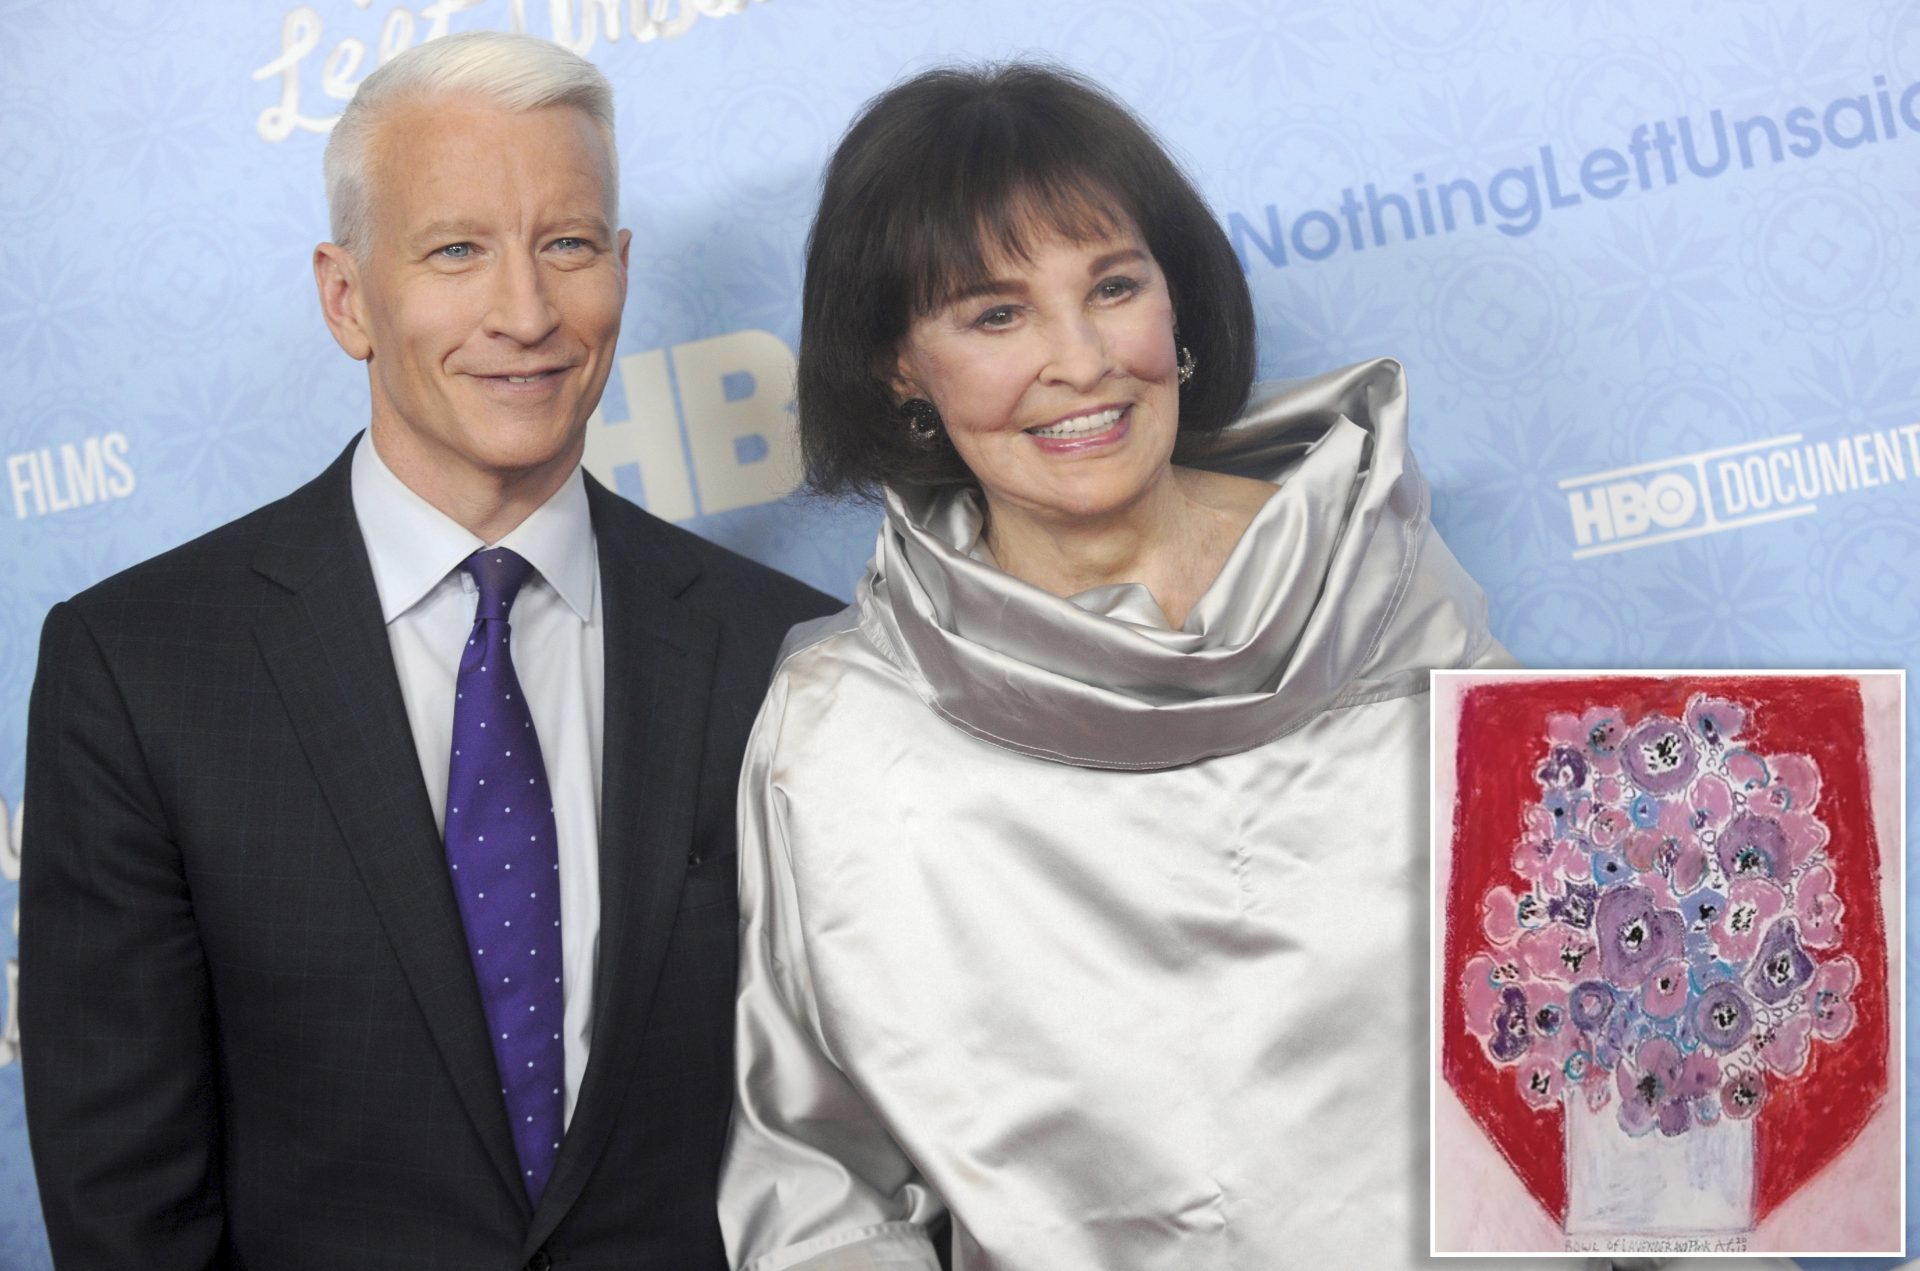 Anderson Cooper created counterfeit online persona to promote his mother’s artwork